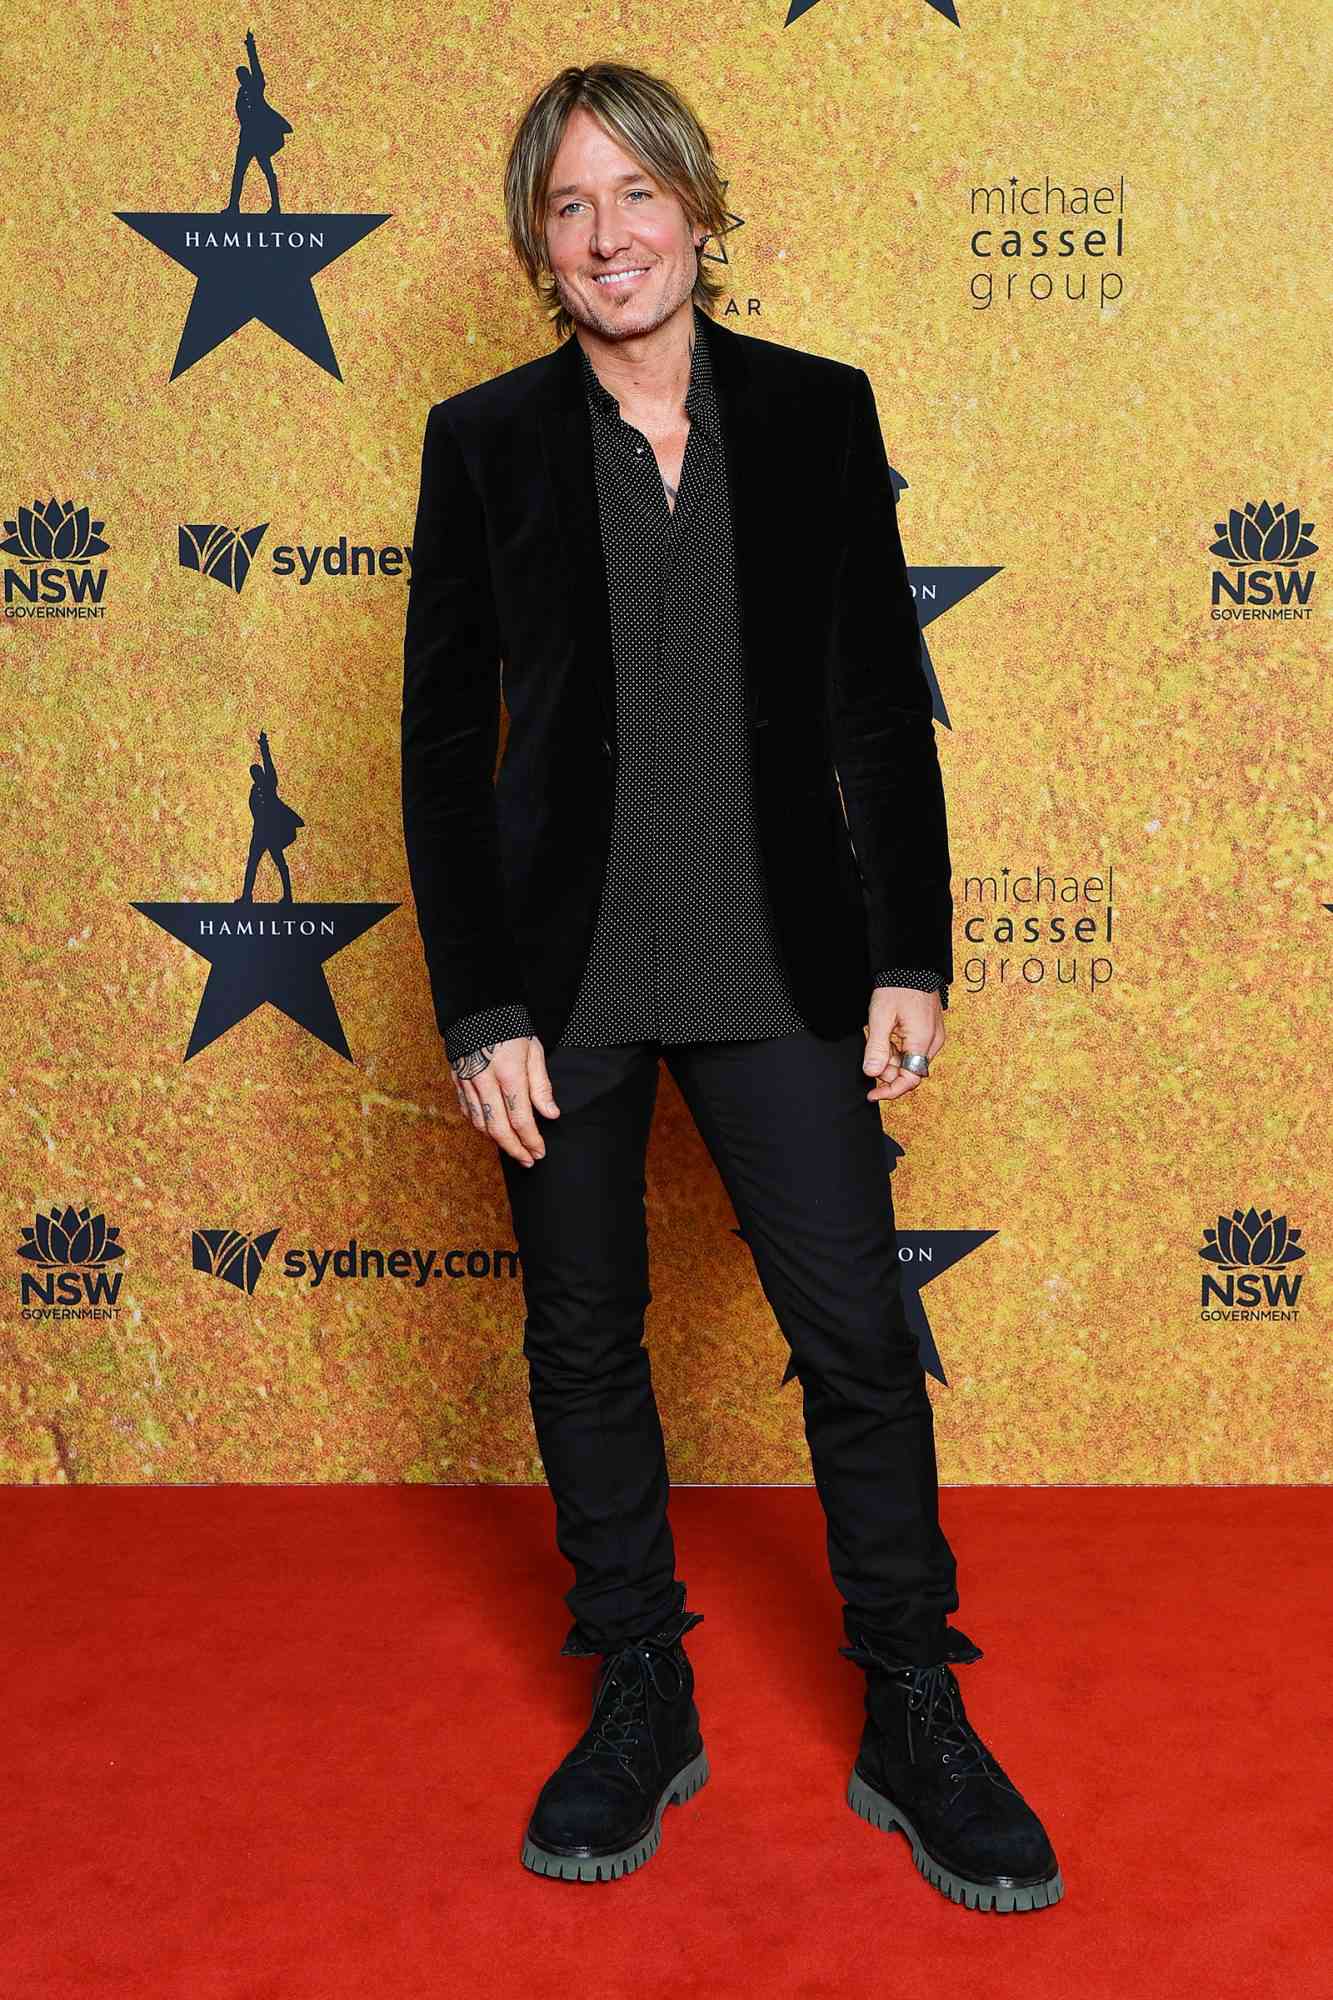 Keith Urban attends the Australian premiere of Hamilton at Lyric Theatre, Star City on March 27, 2021 in Sydney, Australia